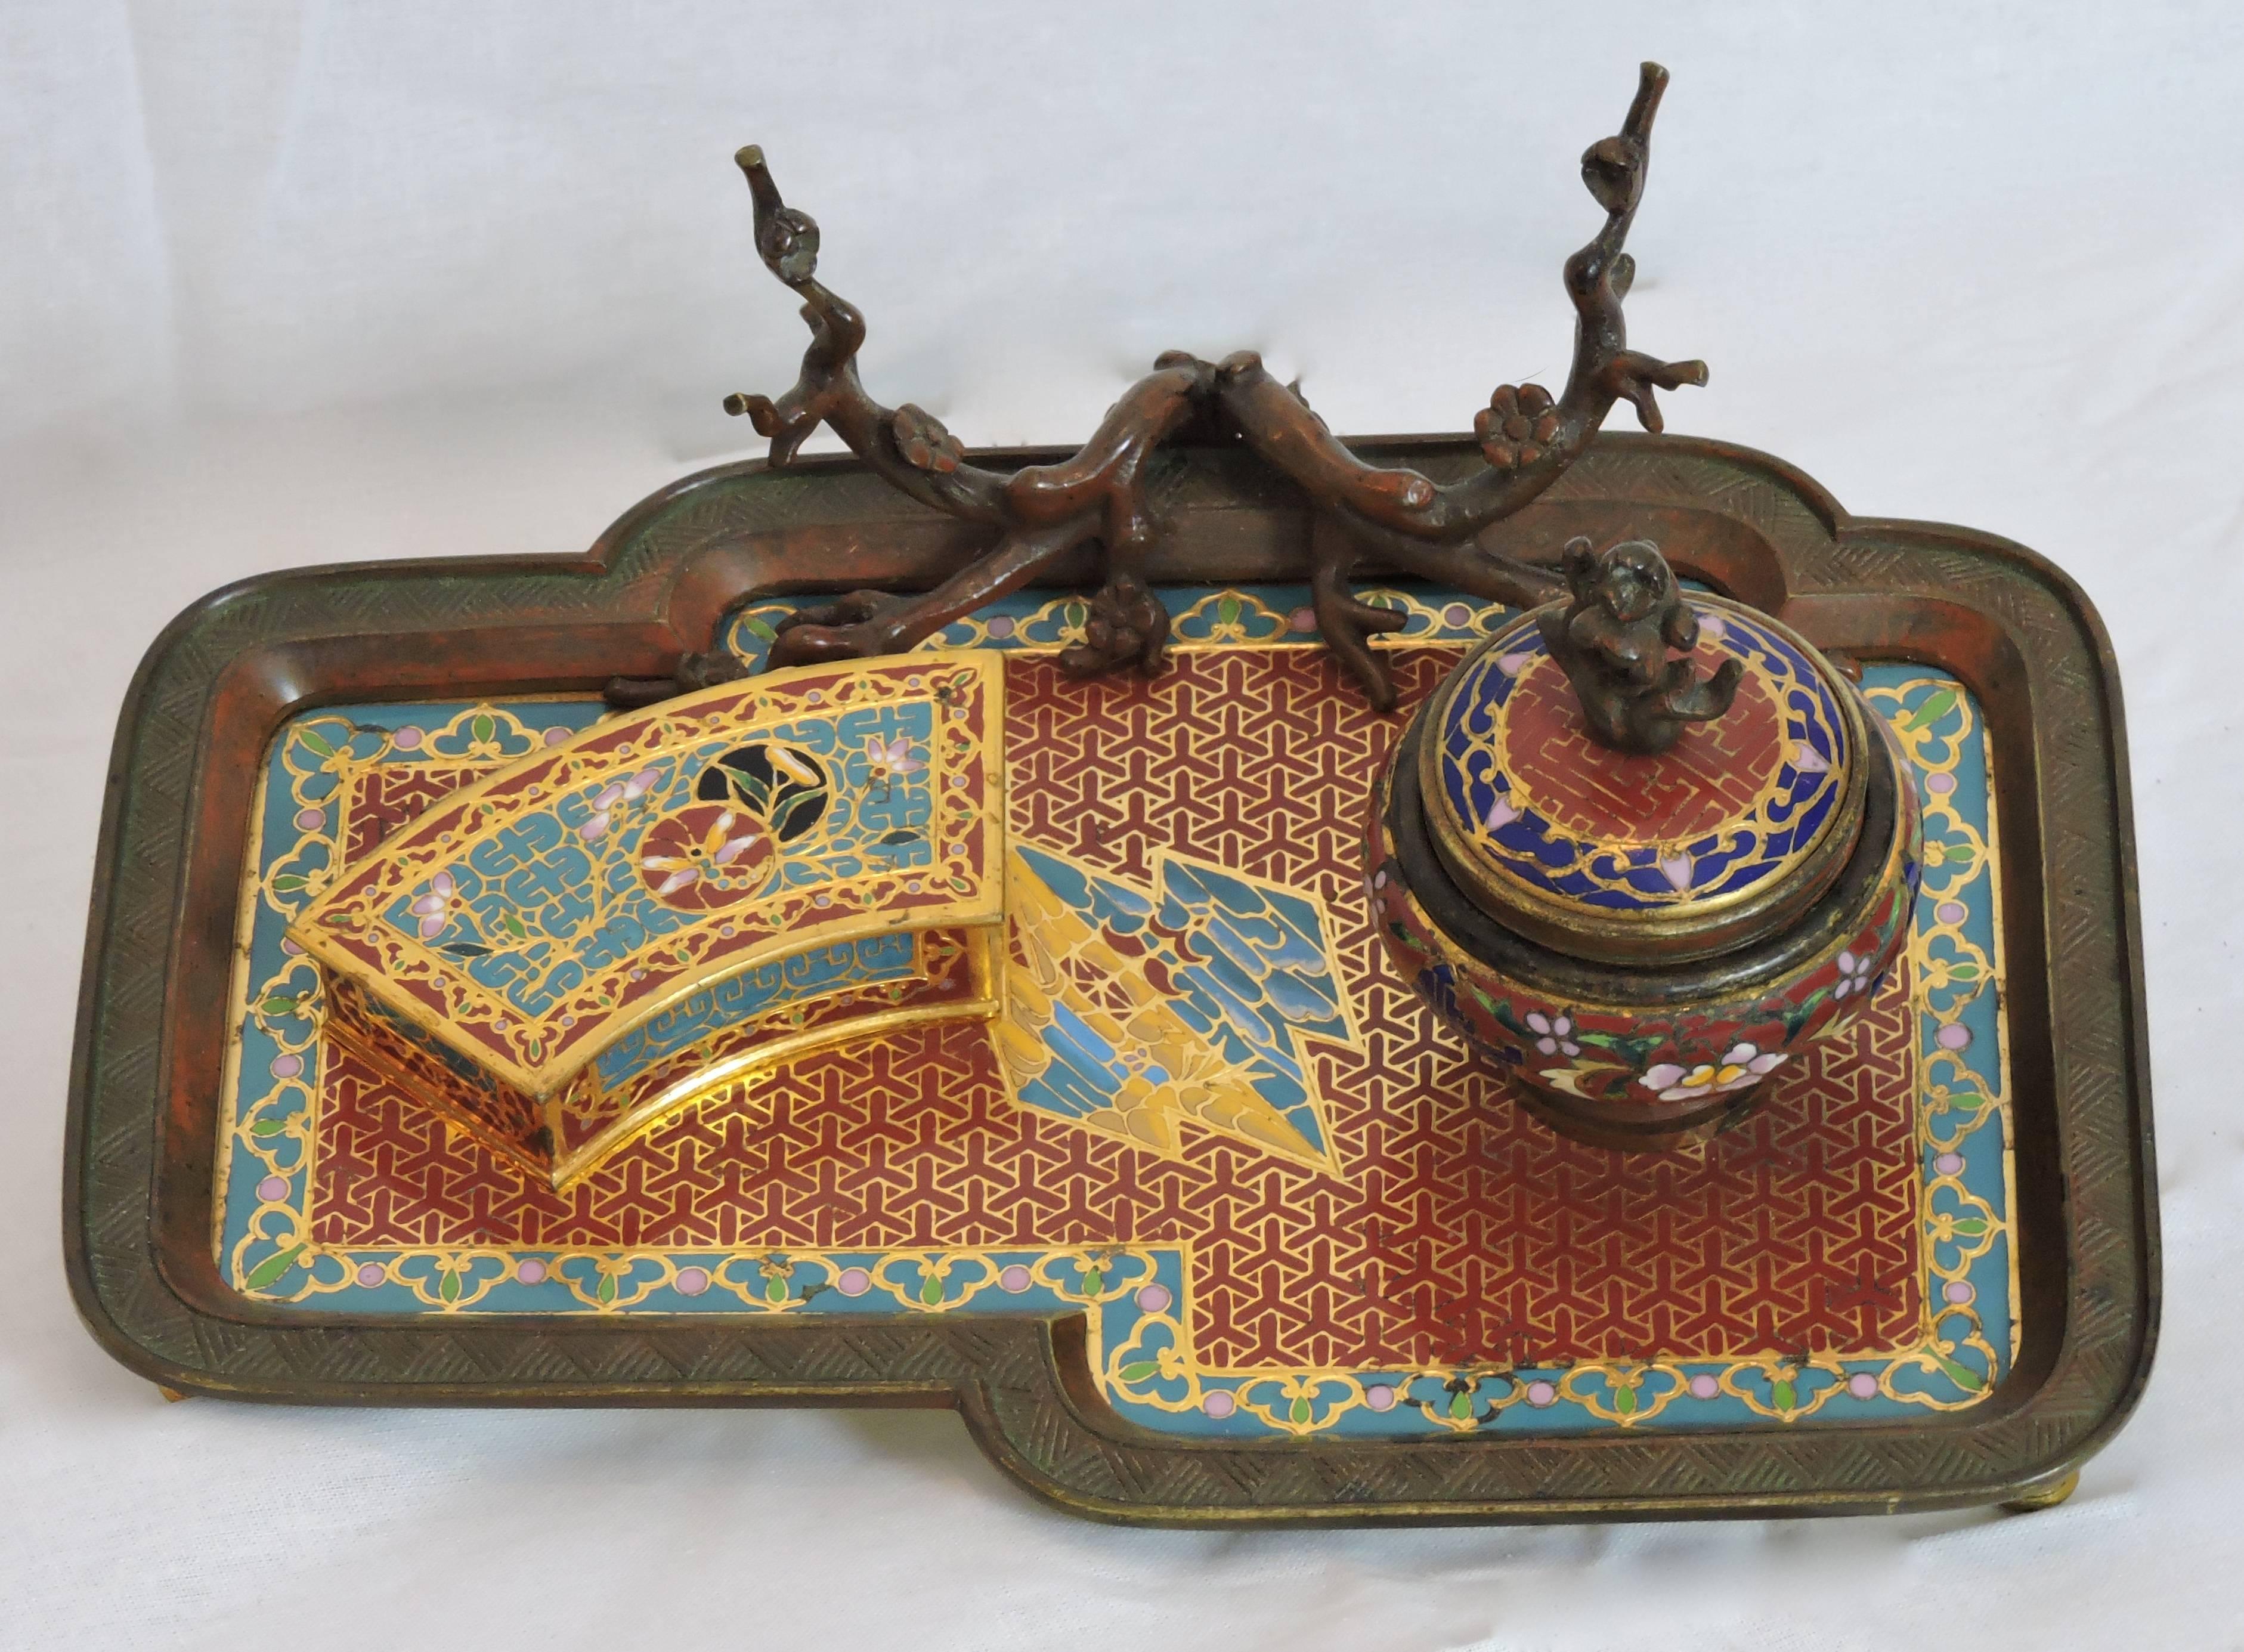 A very nice quality French Japonisme red and gold patina ormolu and cloisonné enamel encrier attributed to Emile Reiber for Christofle, the tray receiving ink reservoir and box, the pencil holder designed as a Japanese tree.